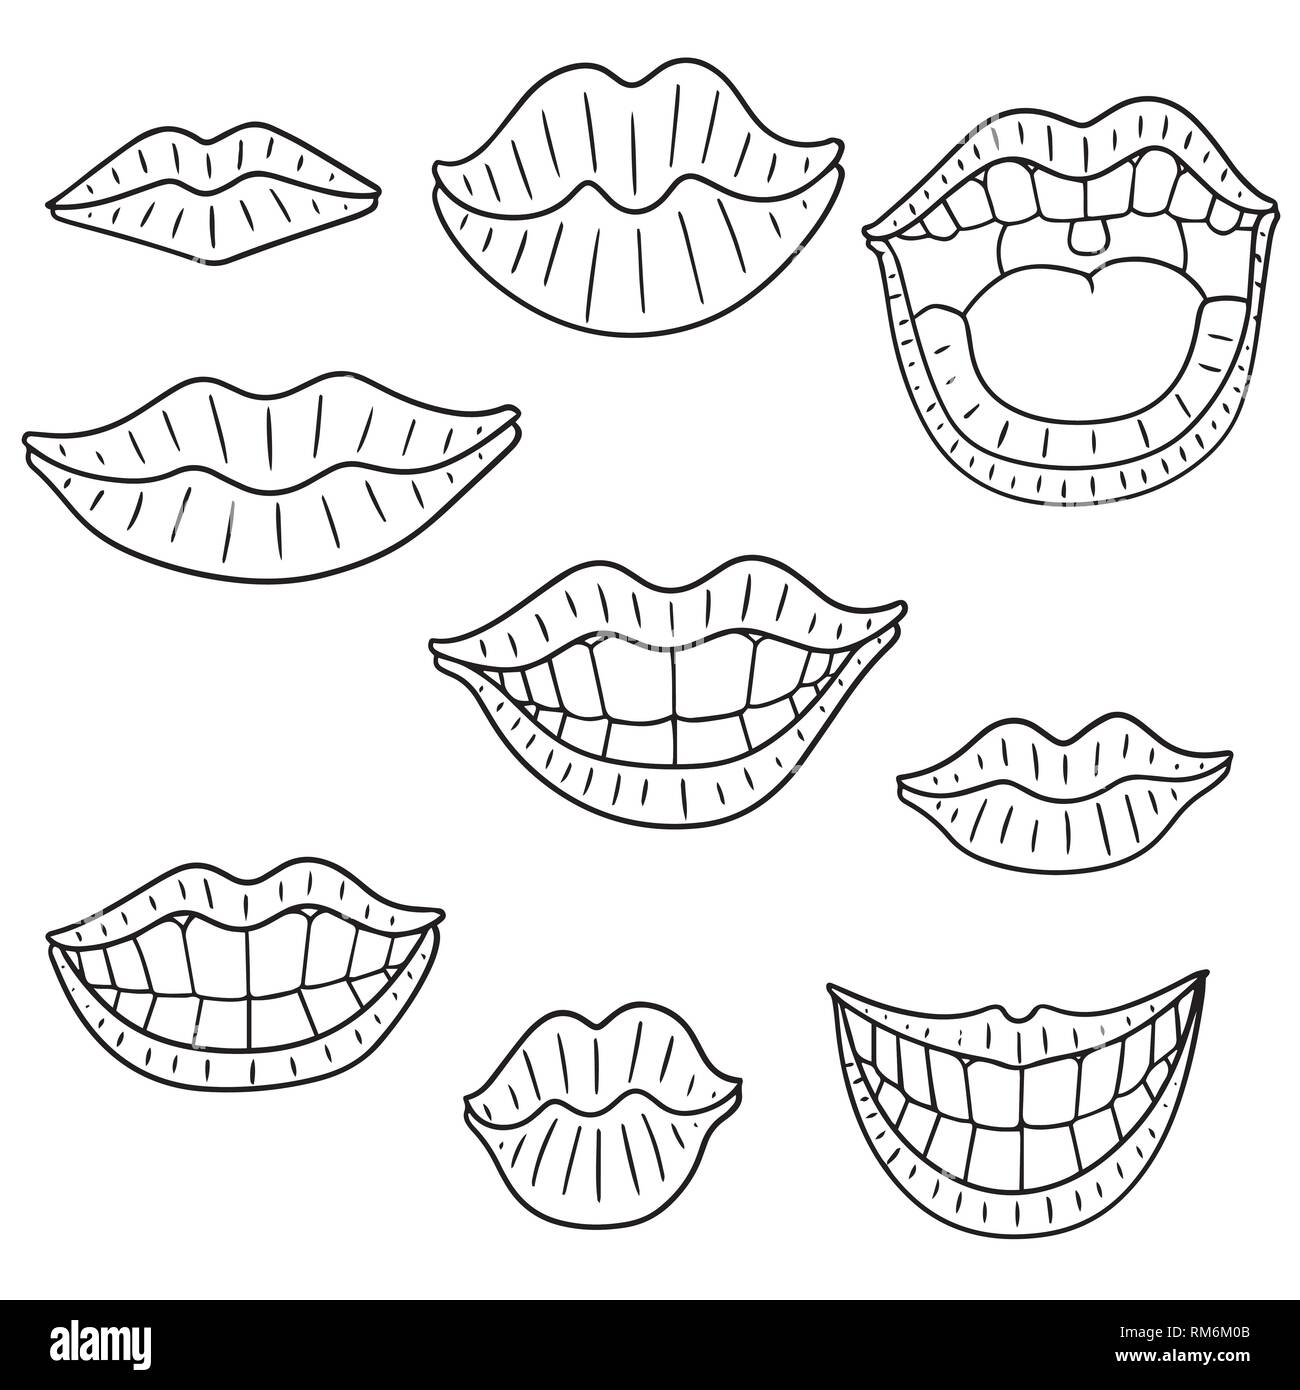 vector set of mouth Stock Vector